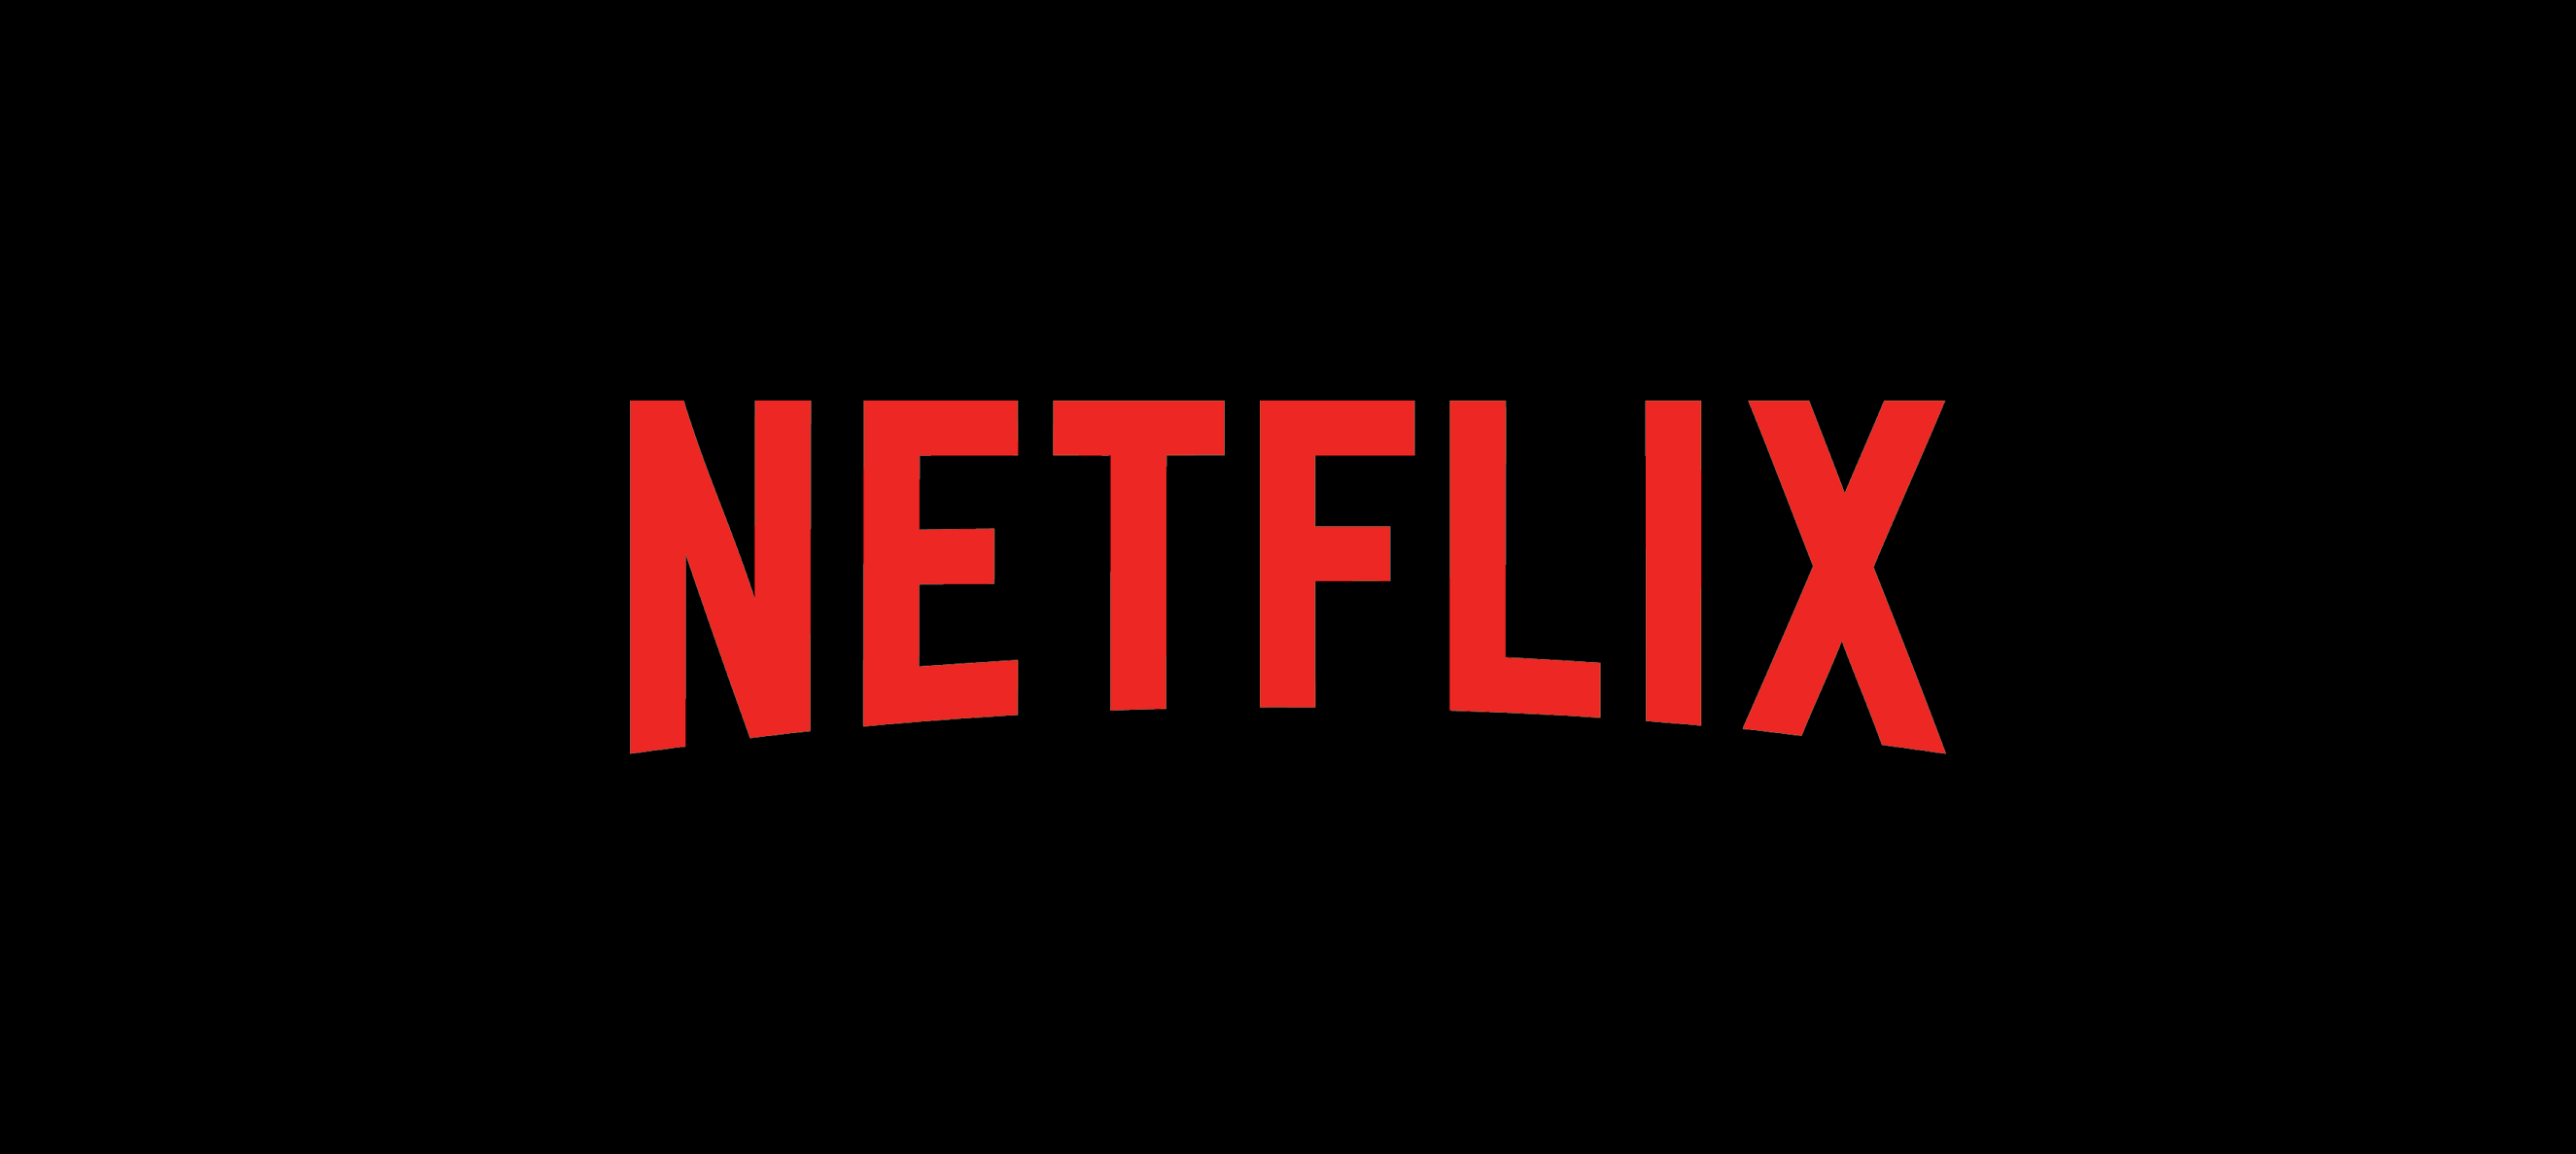 Here's Our Top Recommendations on the Netflix December 2020 Lineup